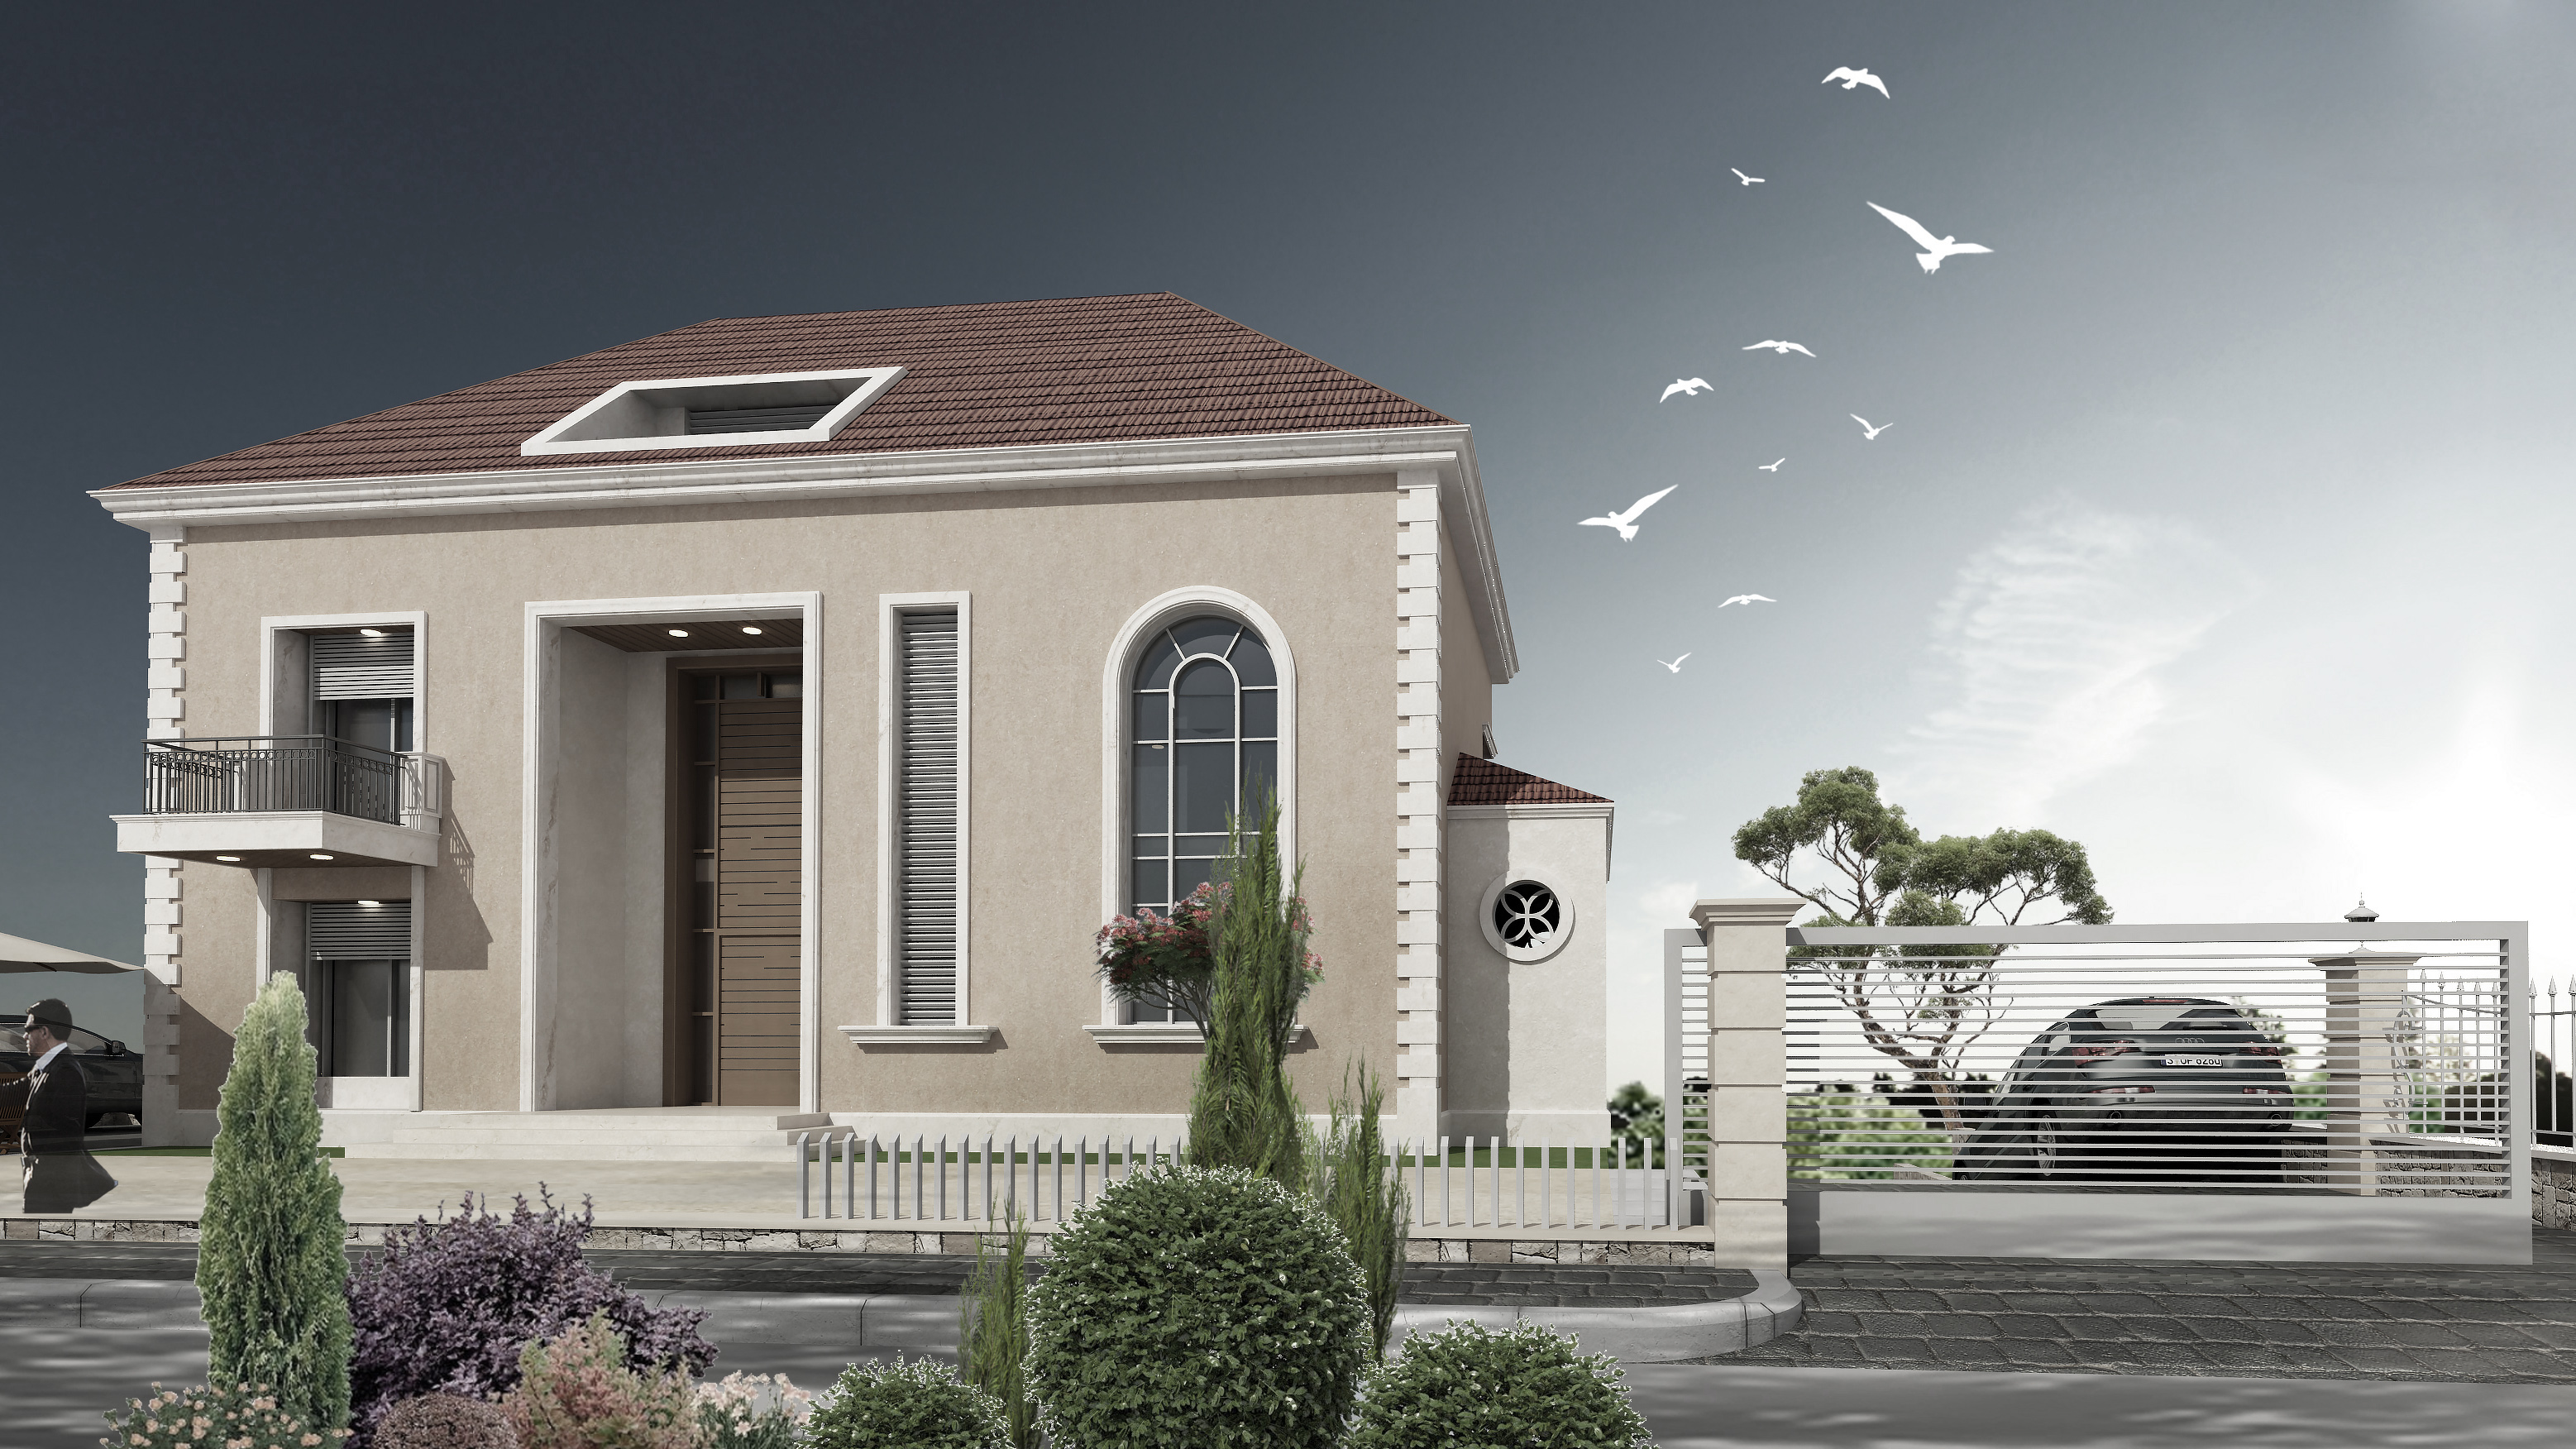 Image of the Meis Villa  project